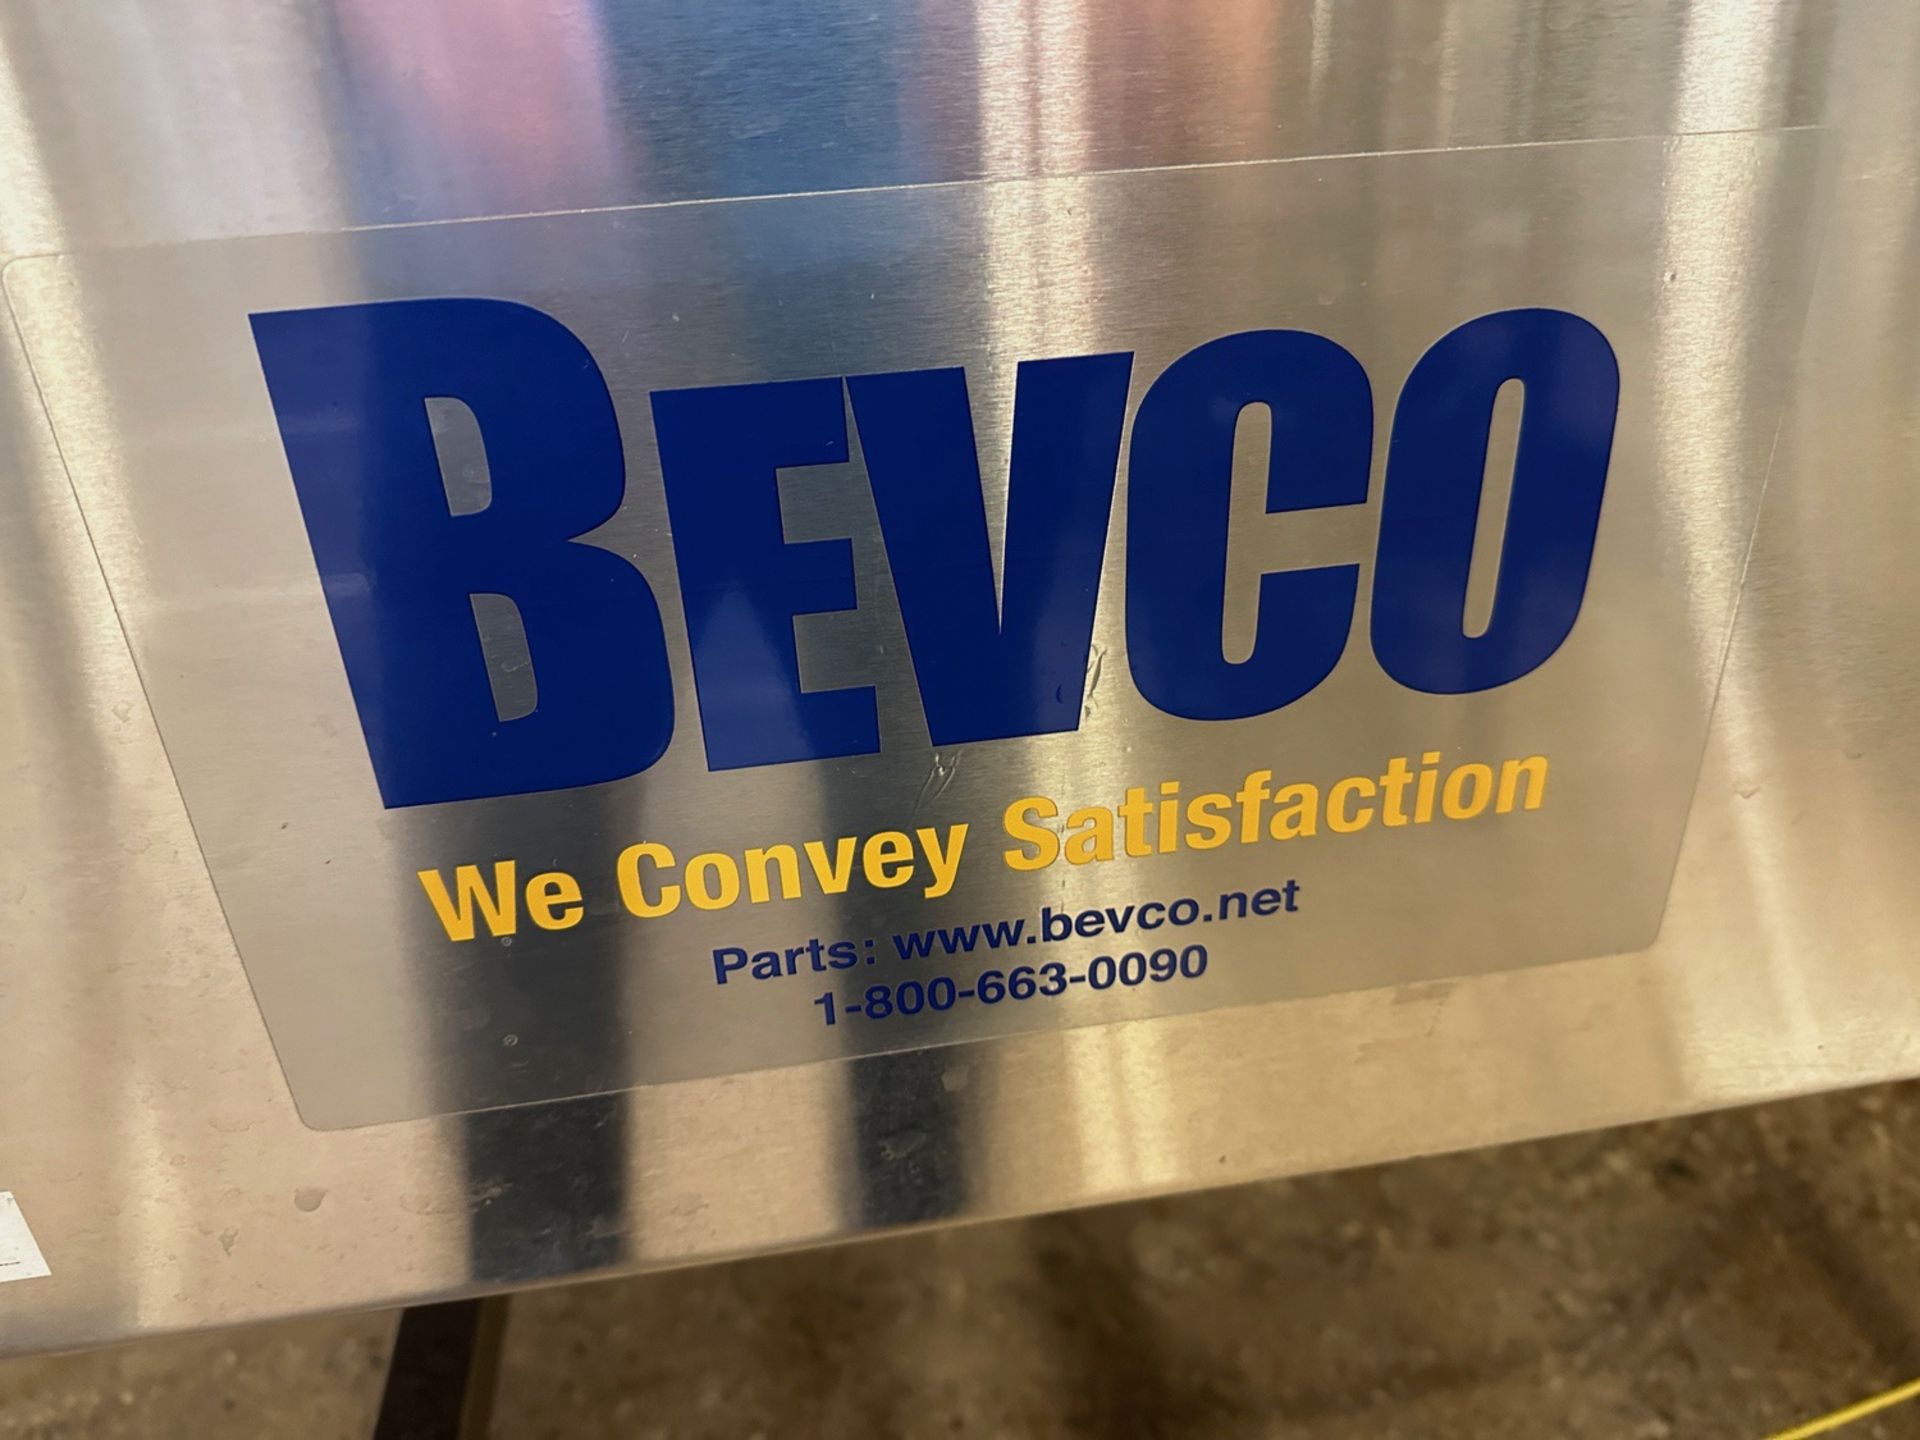 Bevco Accumulation Table over Stainless Steel Frame (Approx. 4' x 11') - Image 4 of 4